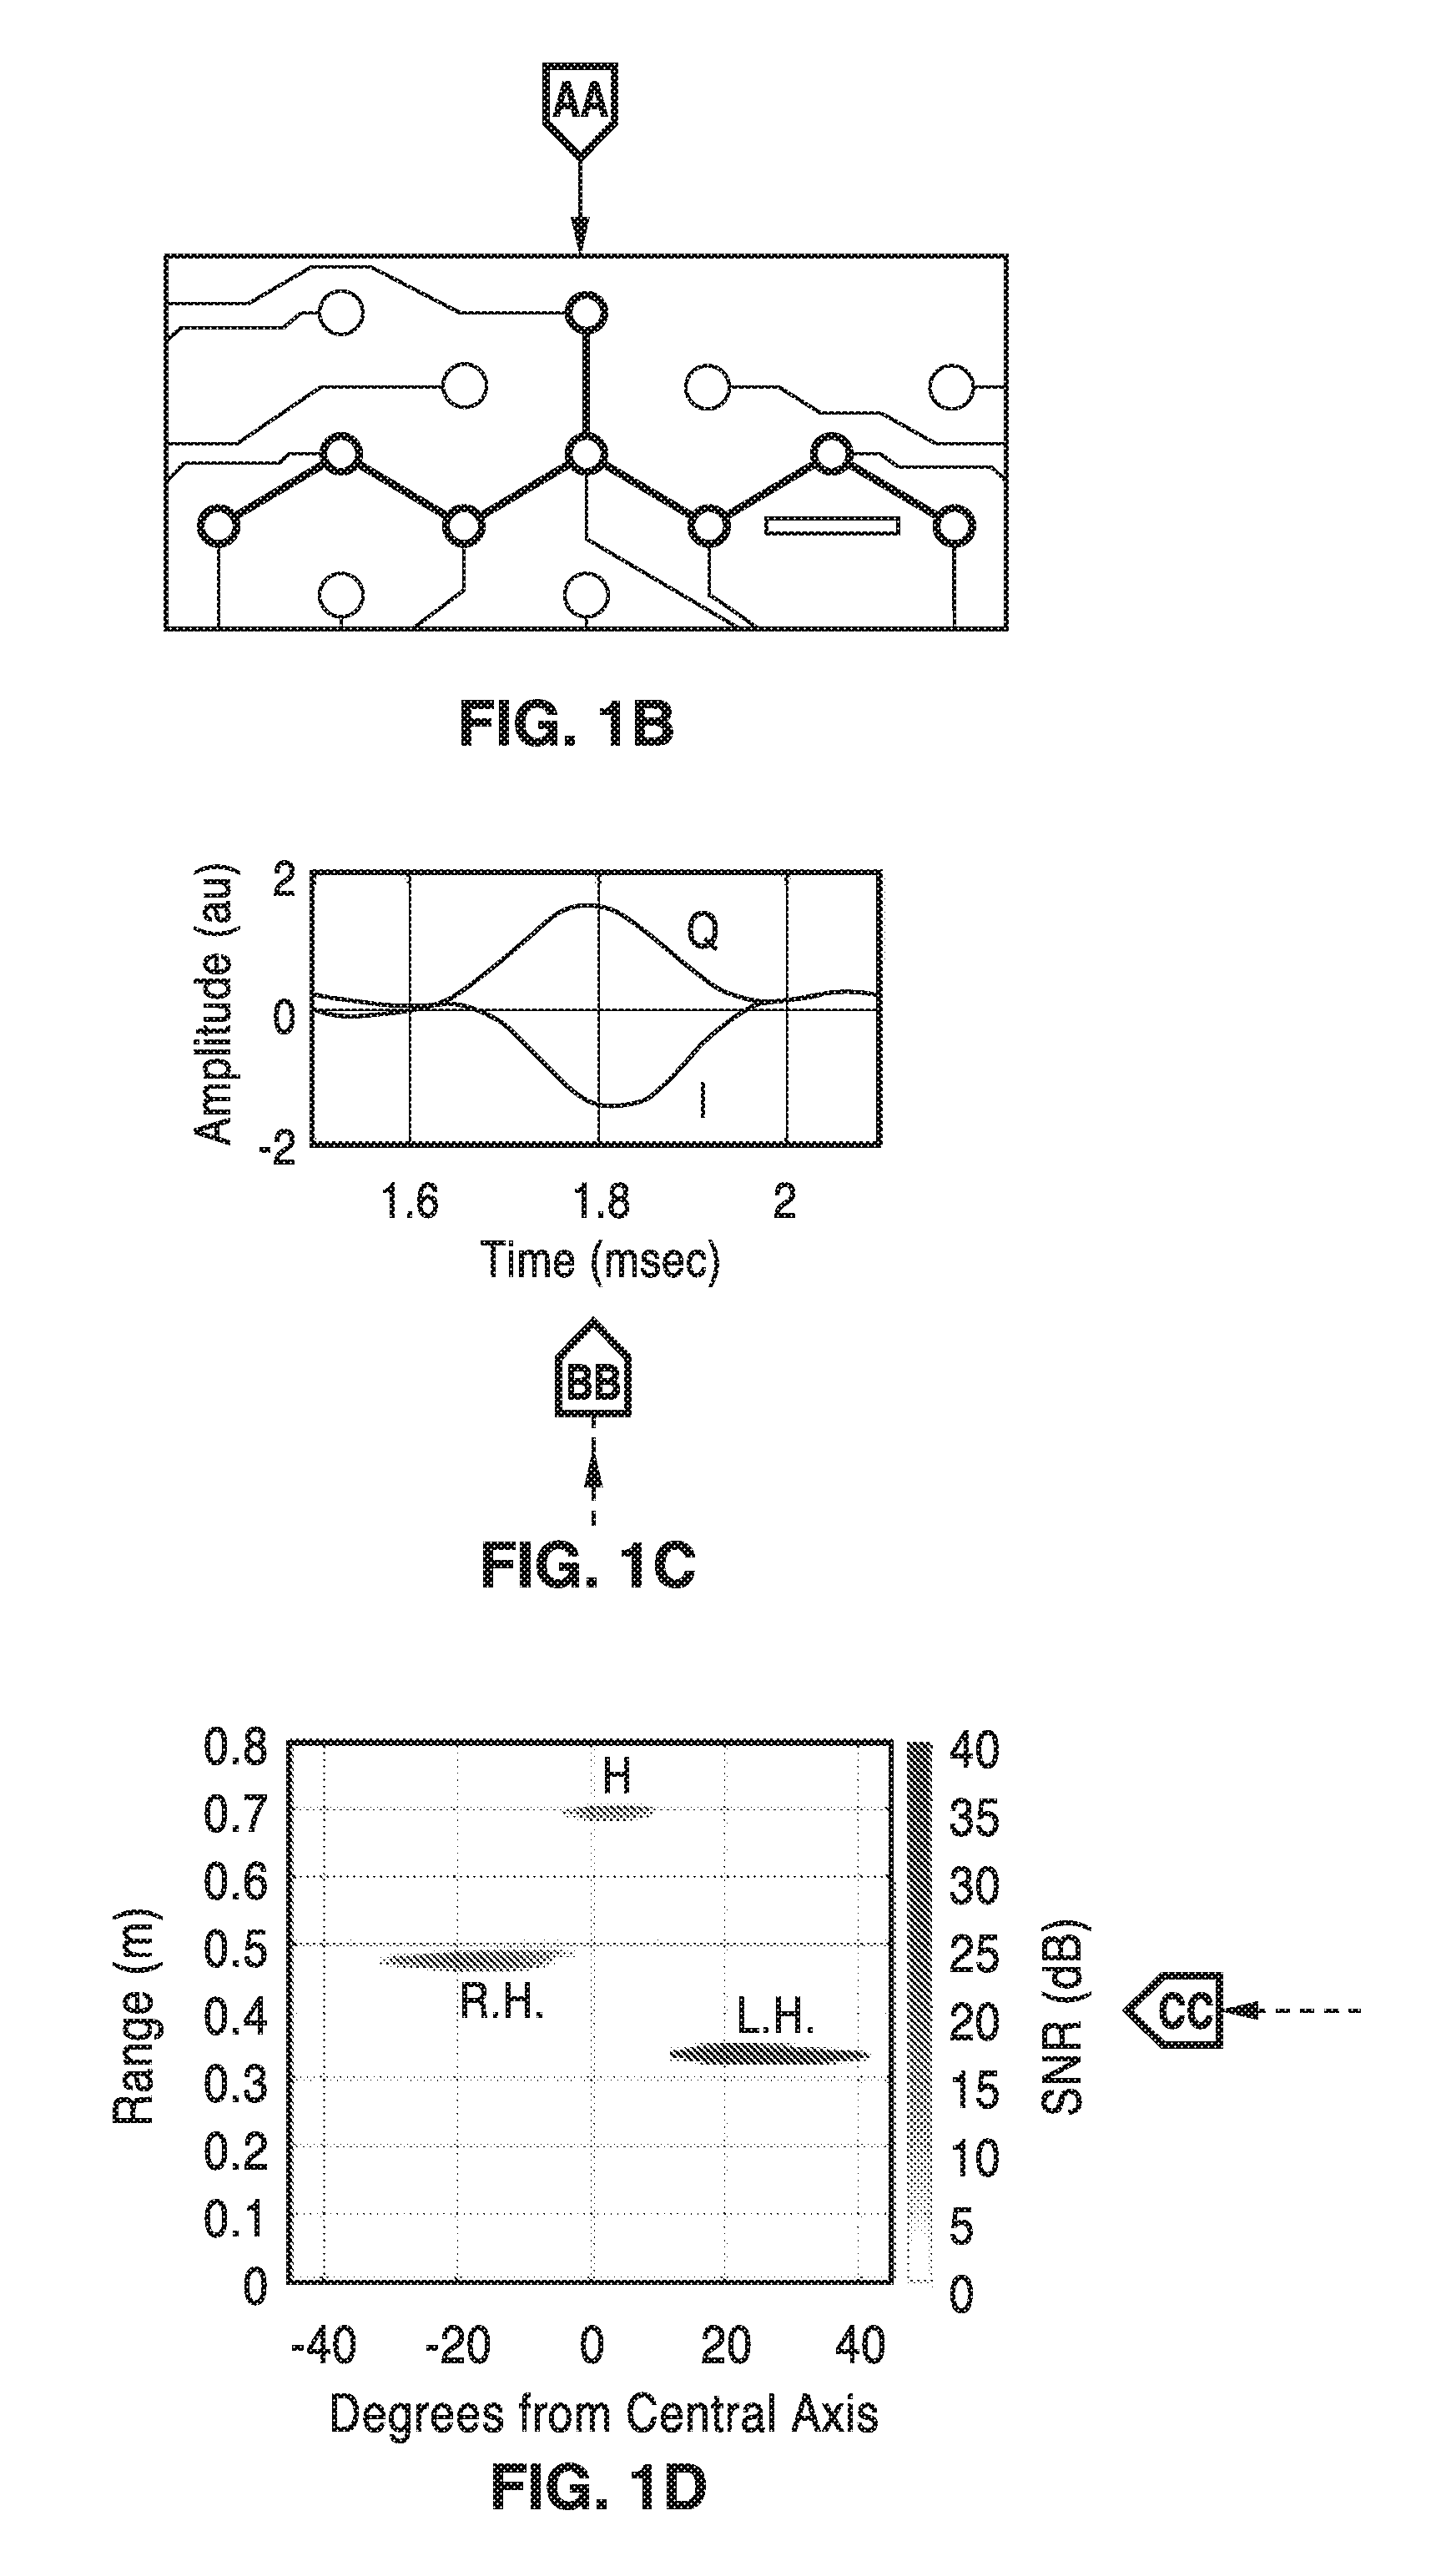 Frequency tuning and/or frequency tracking of a mechanical system with low sensitivity to electrical feedthrough